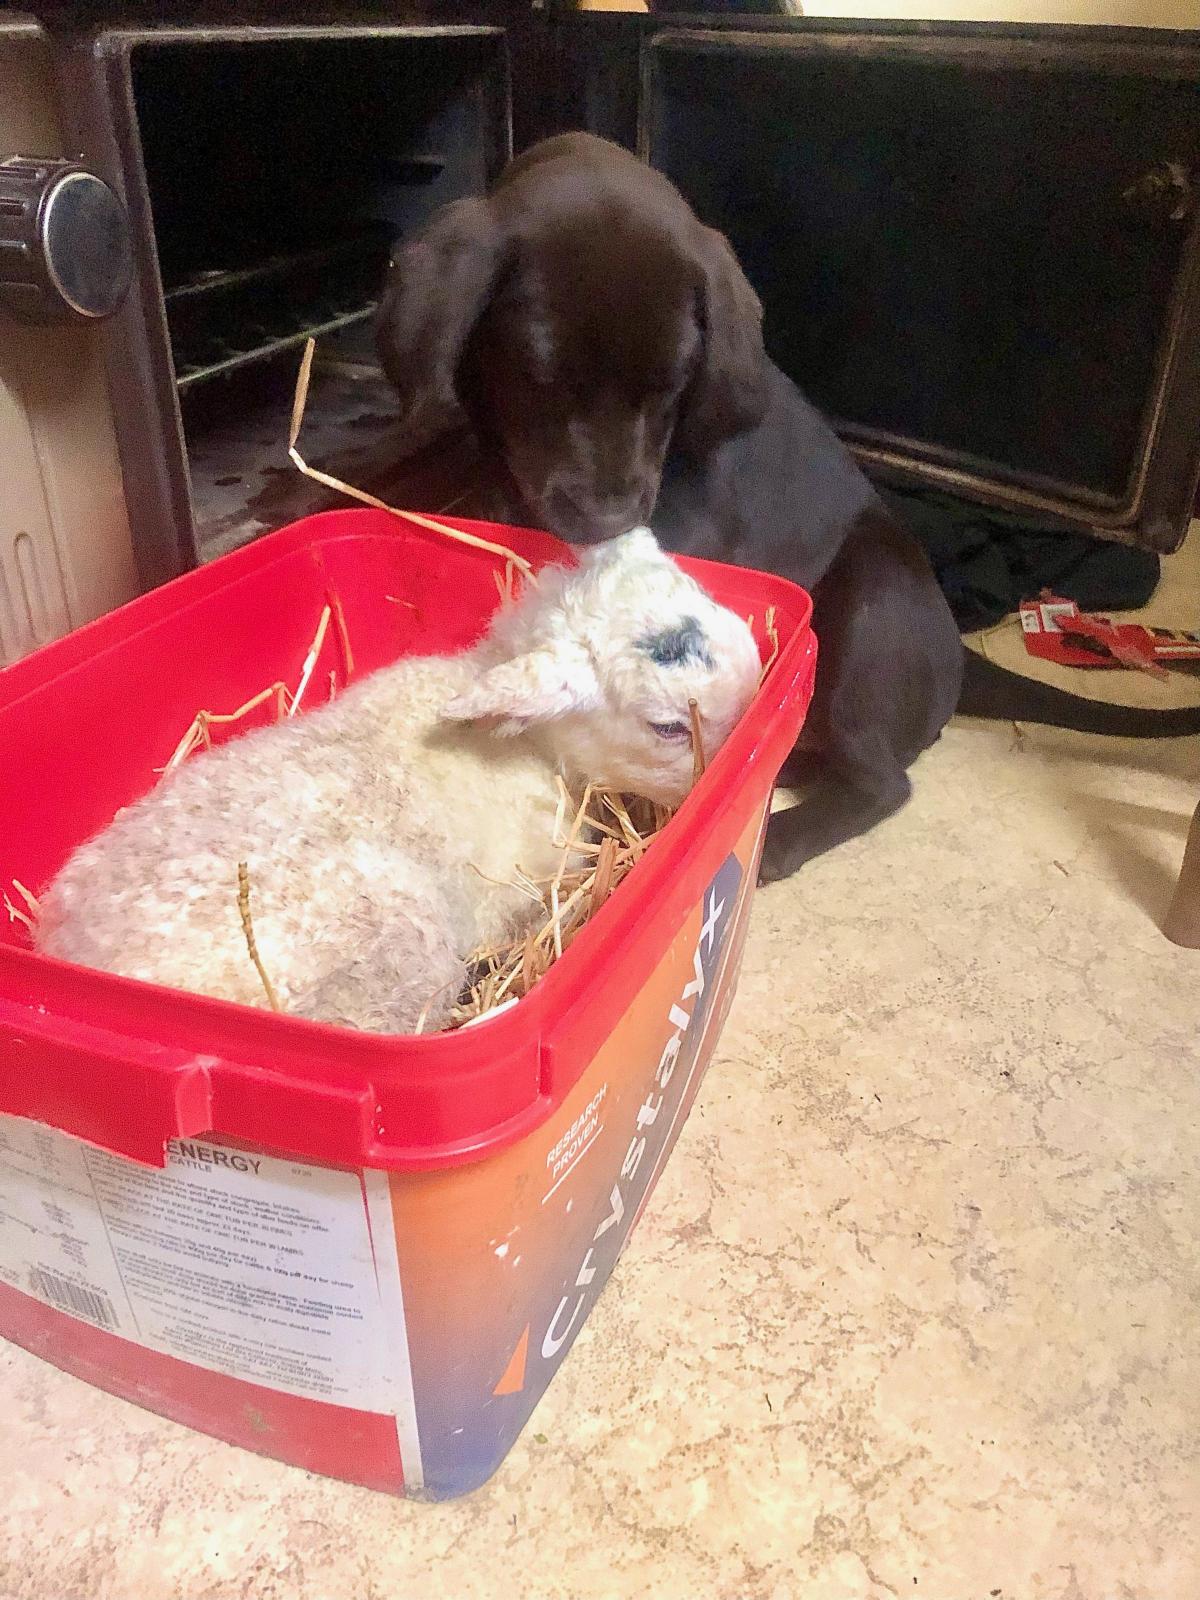 Sarah Bateman (Langholm Farm) -  Luna the chocolate lab trying to be friends with the lamb or just jealous she’s getting all the heat!